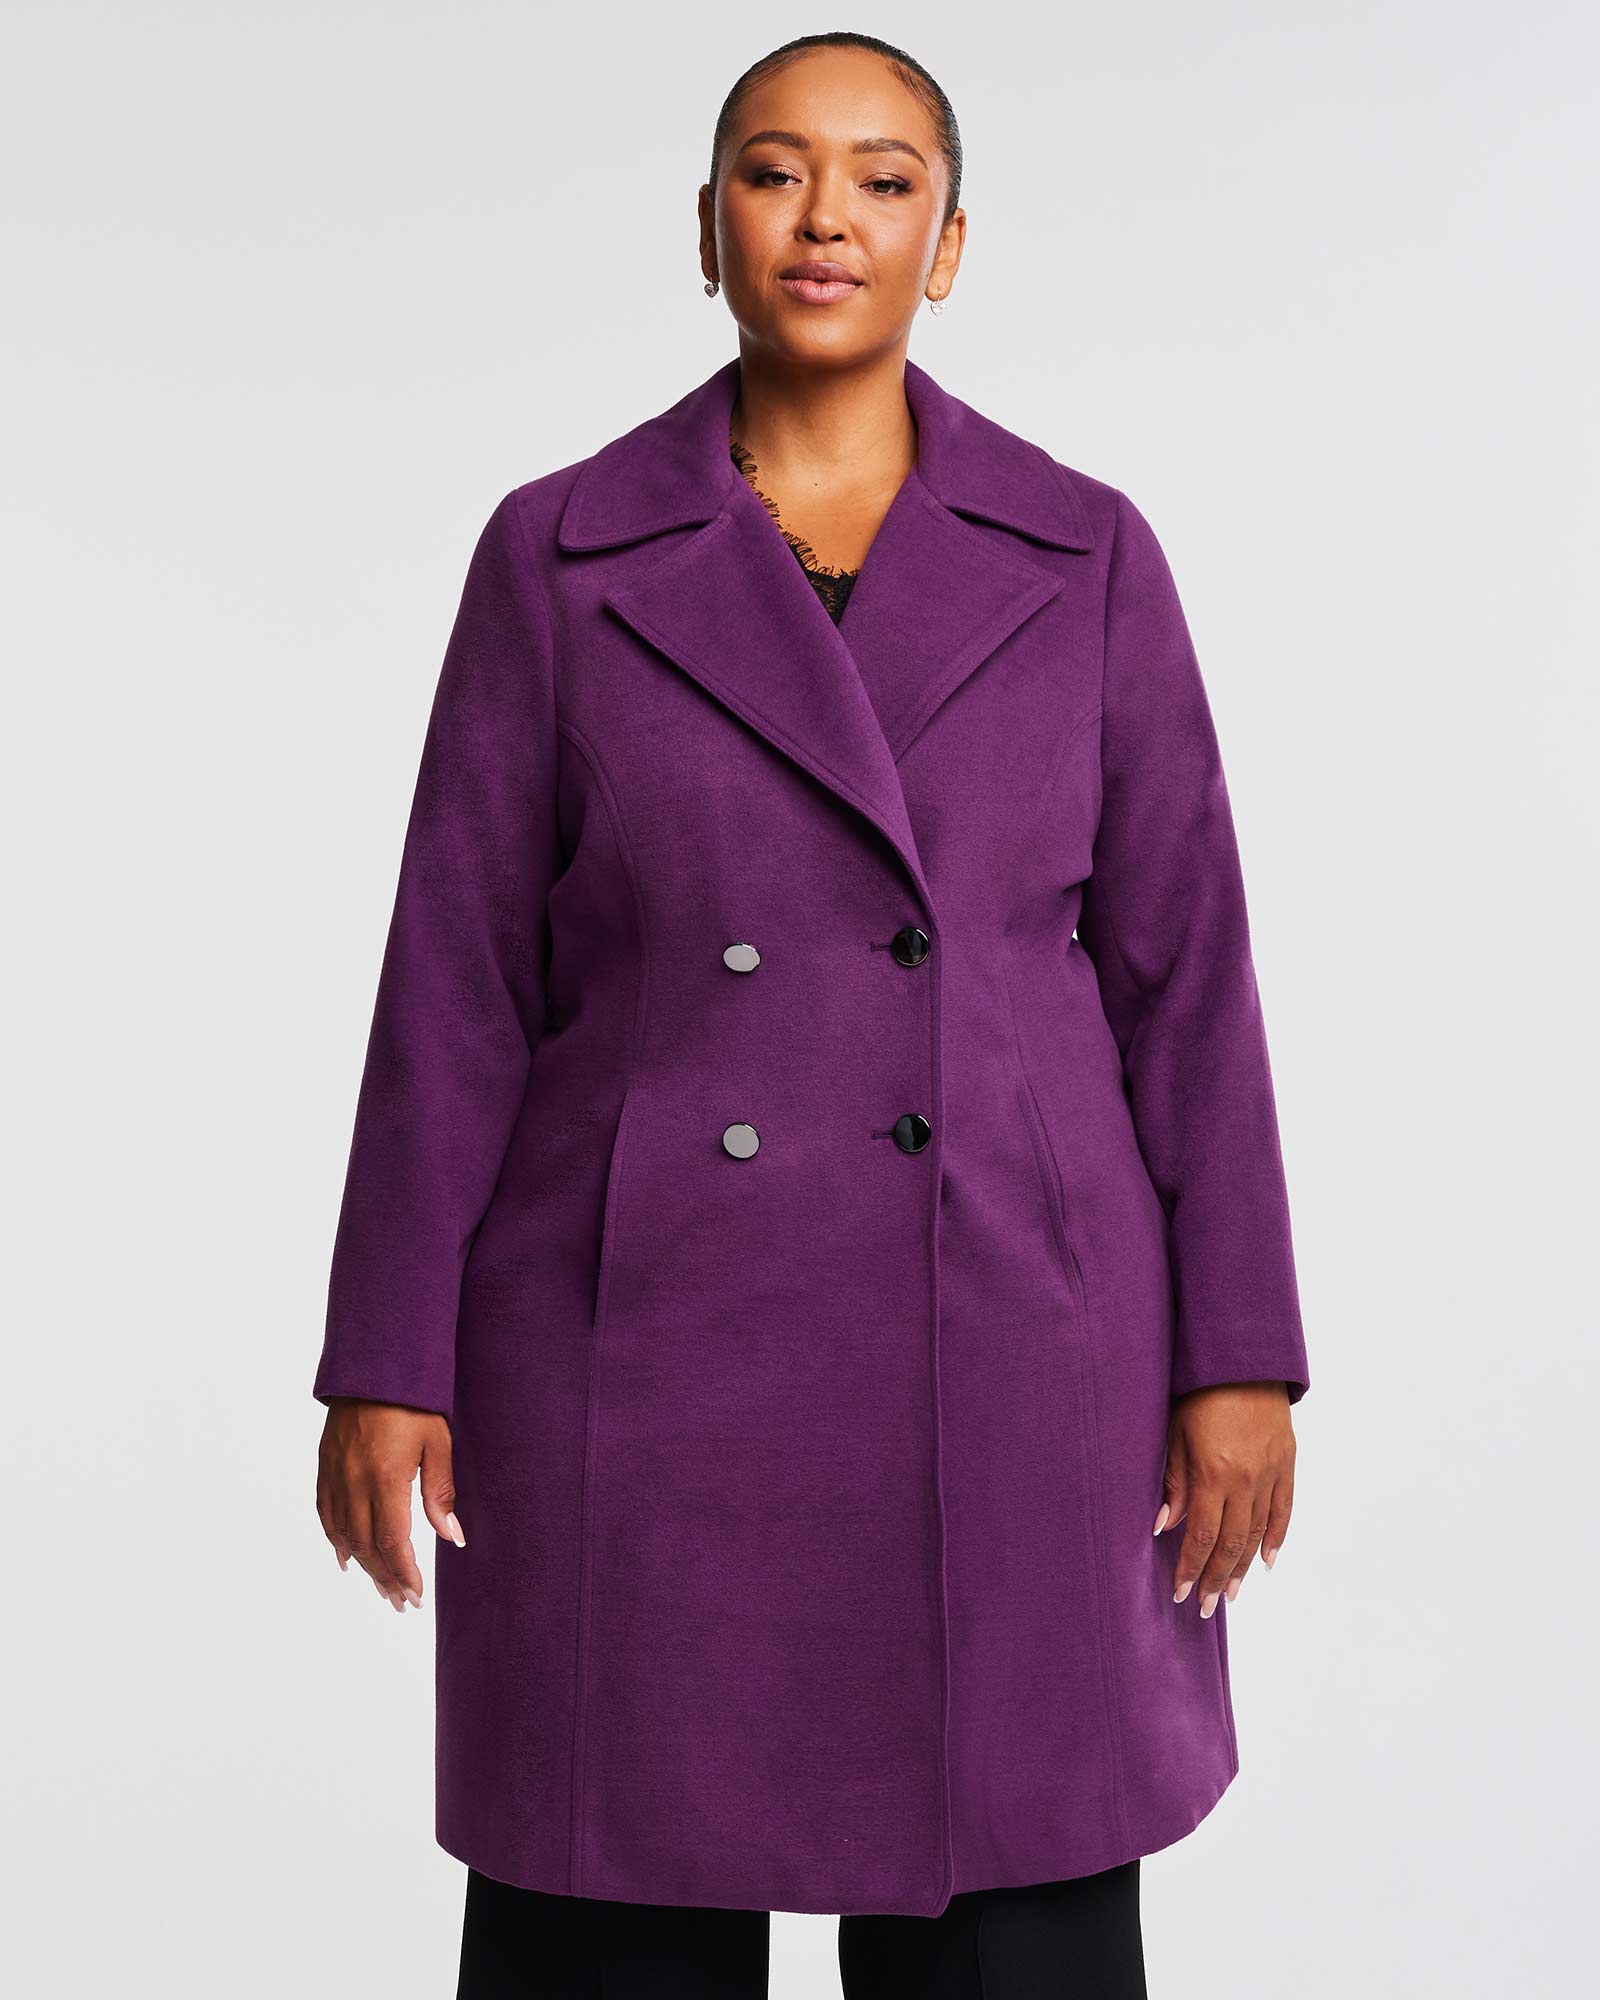 A woman wearing the Estelle Violet Sky Double Breasted Coat and black pants.